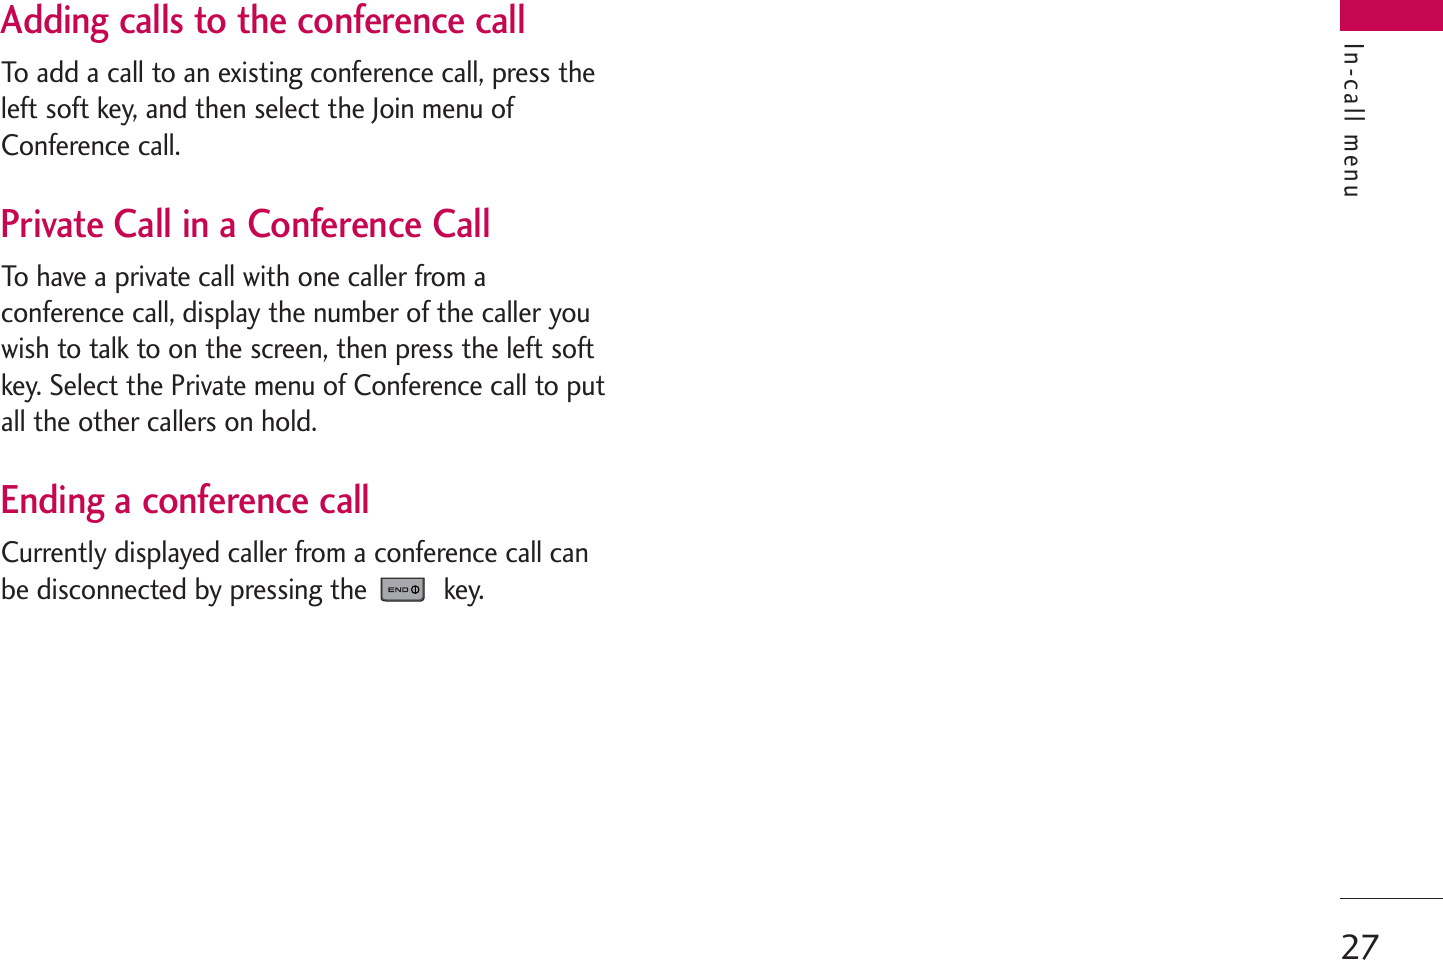 27In-call menuAdding calls to the conference callTo add a call to an existing conference call, press theleft soft key, and then select the Join menu ofConference call.Private Call in a Conference CallTo have a private call with one caller from aconference call, display the number of the caller youwish to talk to on the screen, then press the left softkey. Select the Private menu of Conference call to putall the other callers on hold.Ending a conference callCurrently displayed caller from a conference call canbe disconnected by pressing the  key.